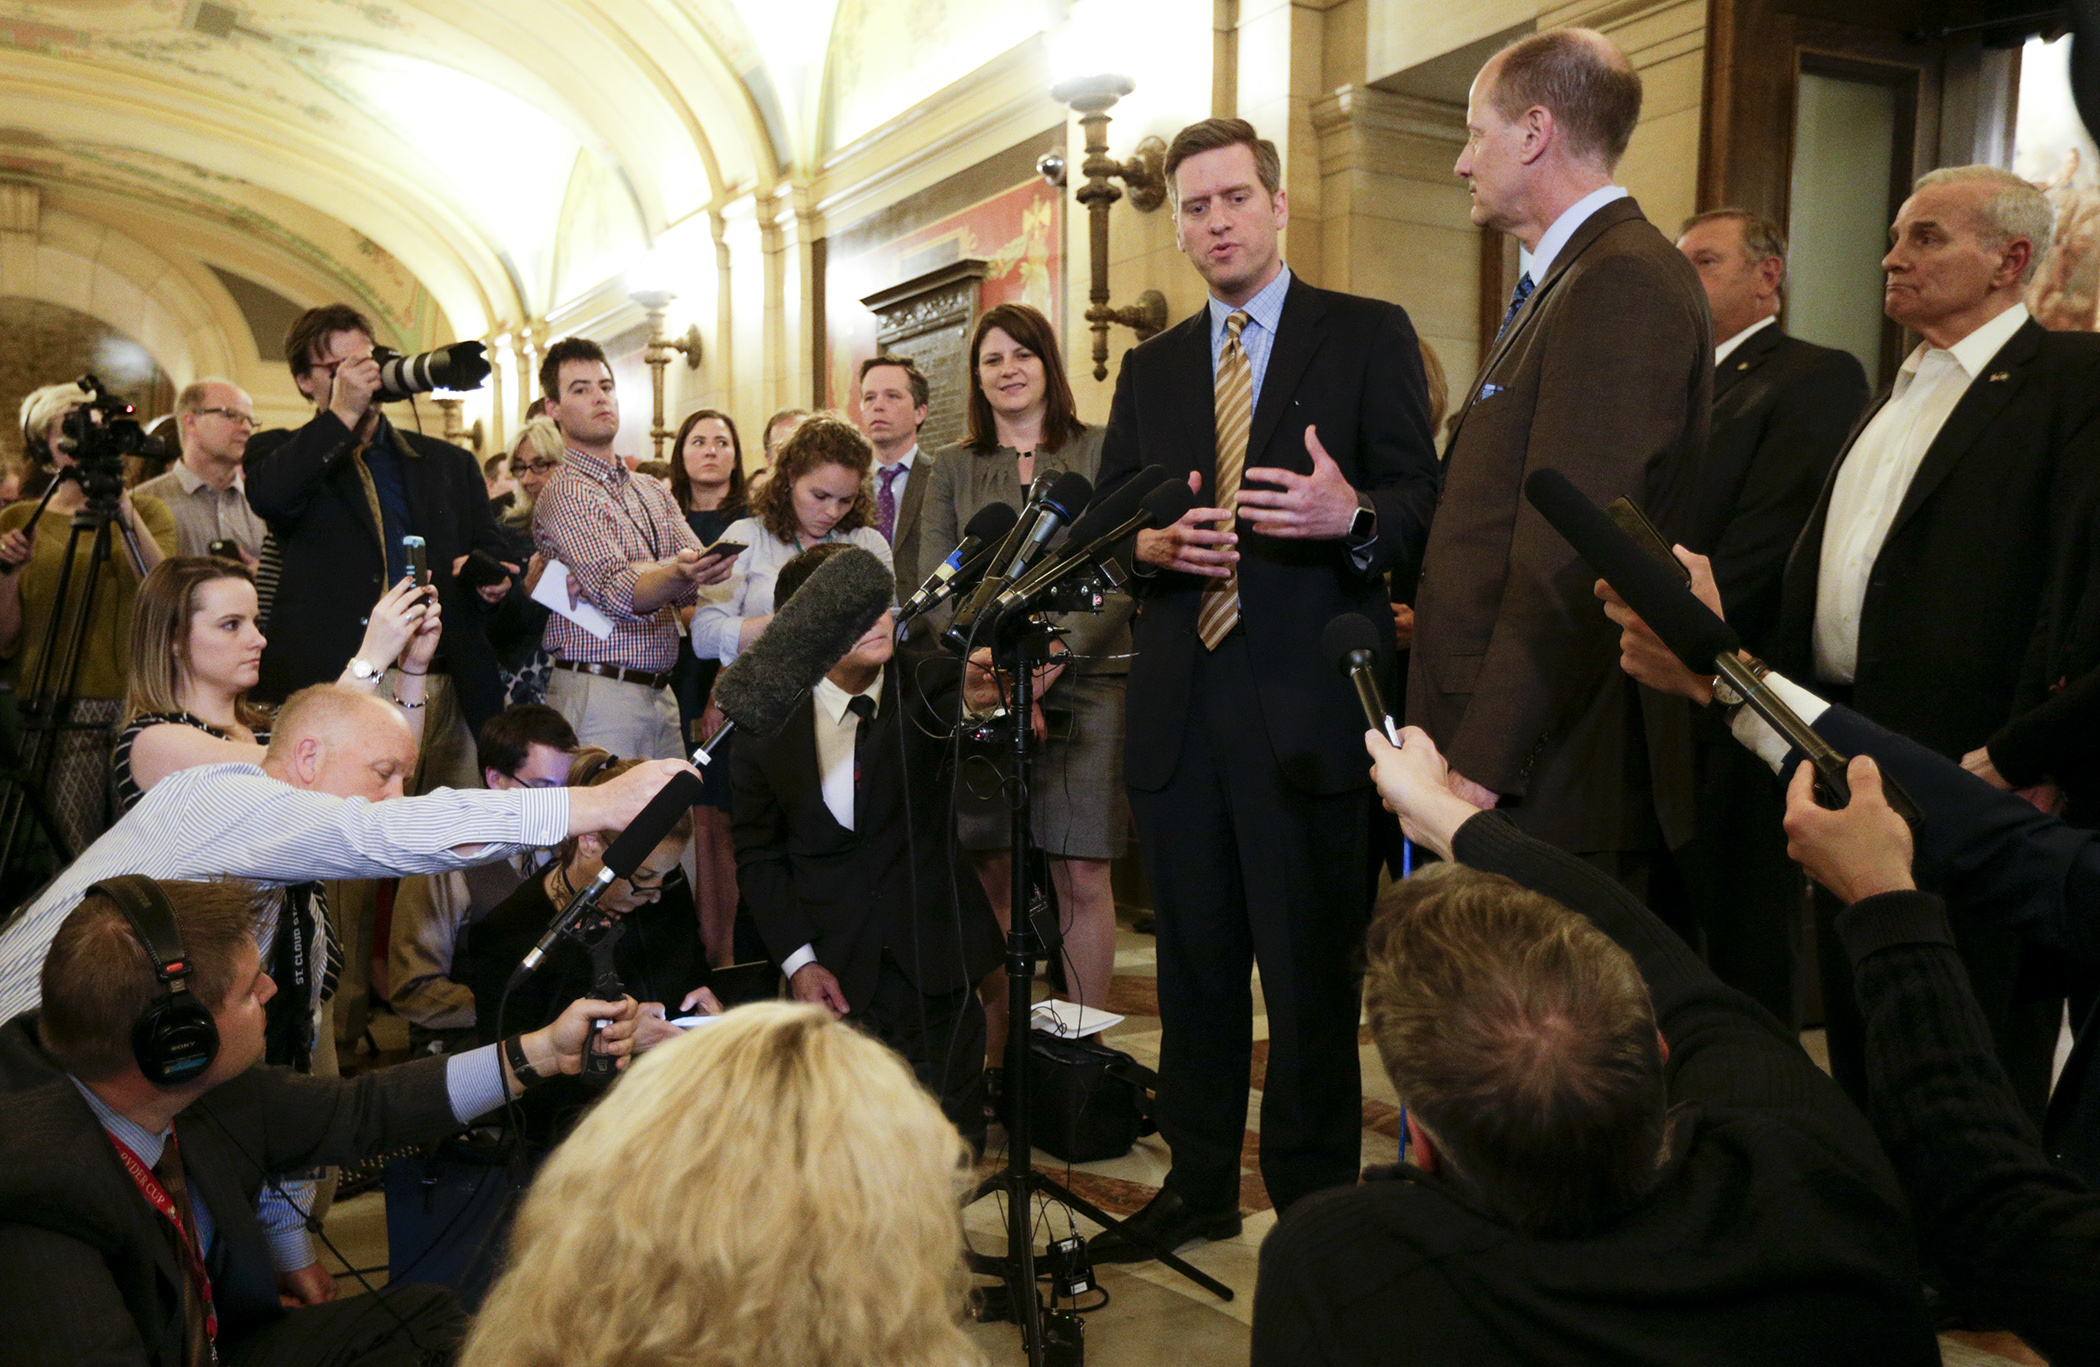 Surrounded by other legislative leaders and Gov. Mark Dayton late Monday night, House Speaker Kurt Daudt announces a tentative budget agreement has been reached and a special session will begin at 12:01 a.m. May 23. Photo by Paul Battaglia